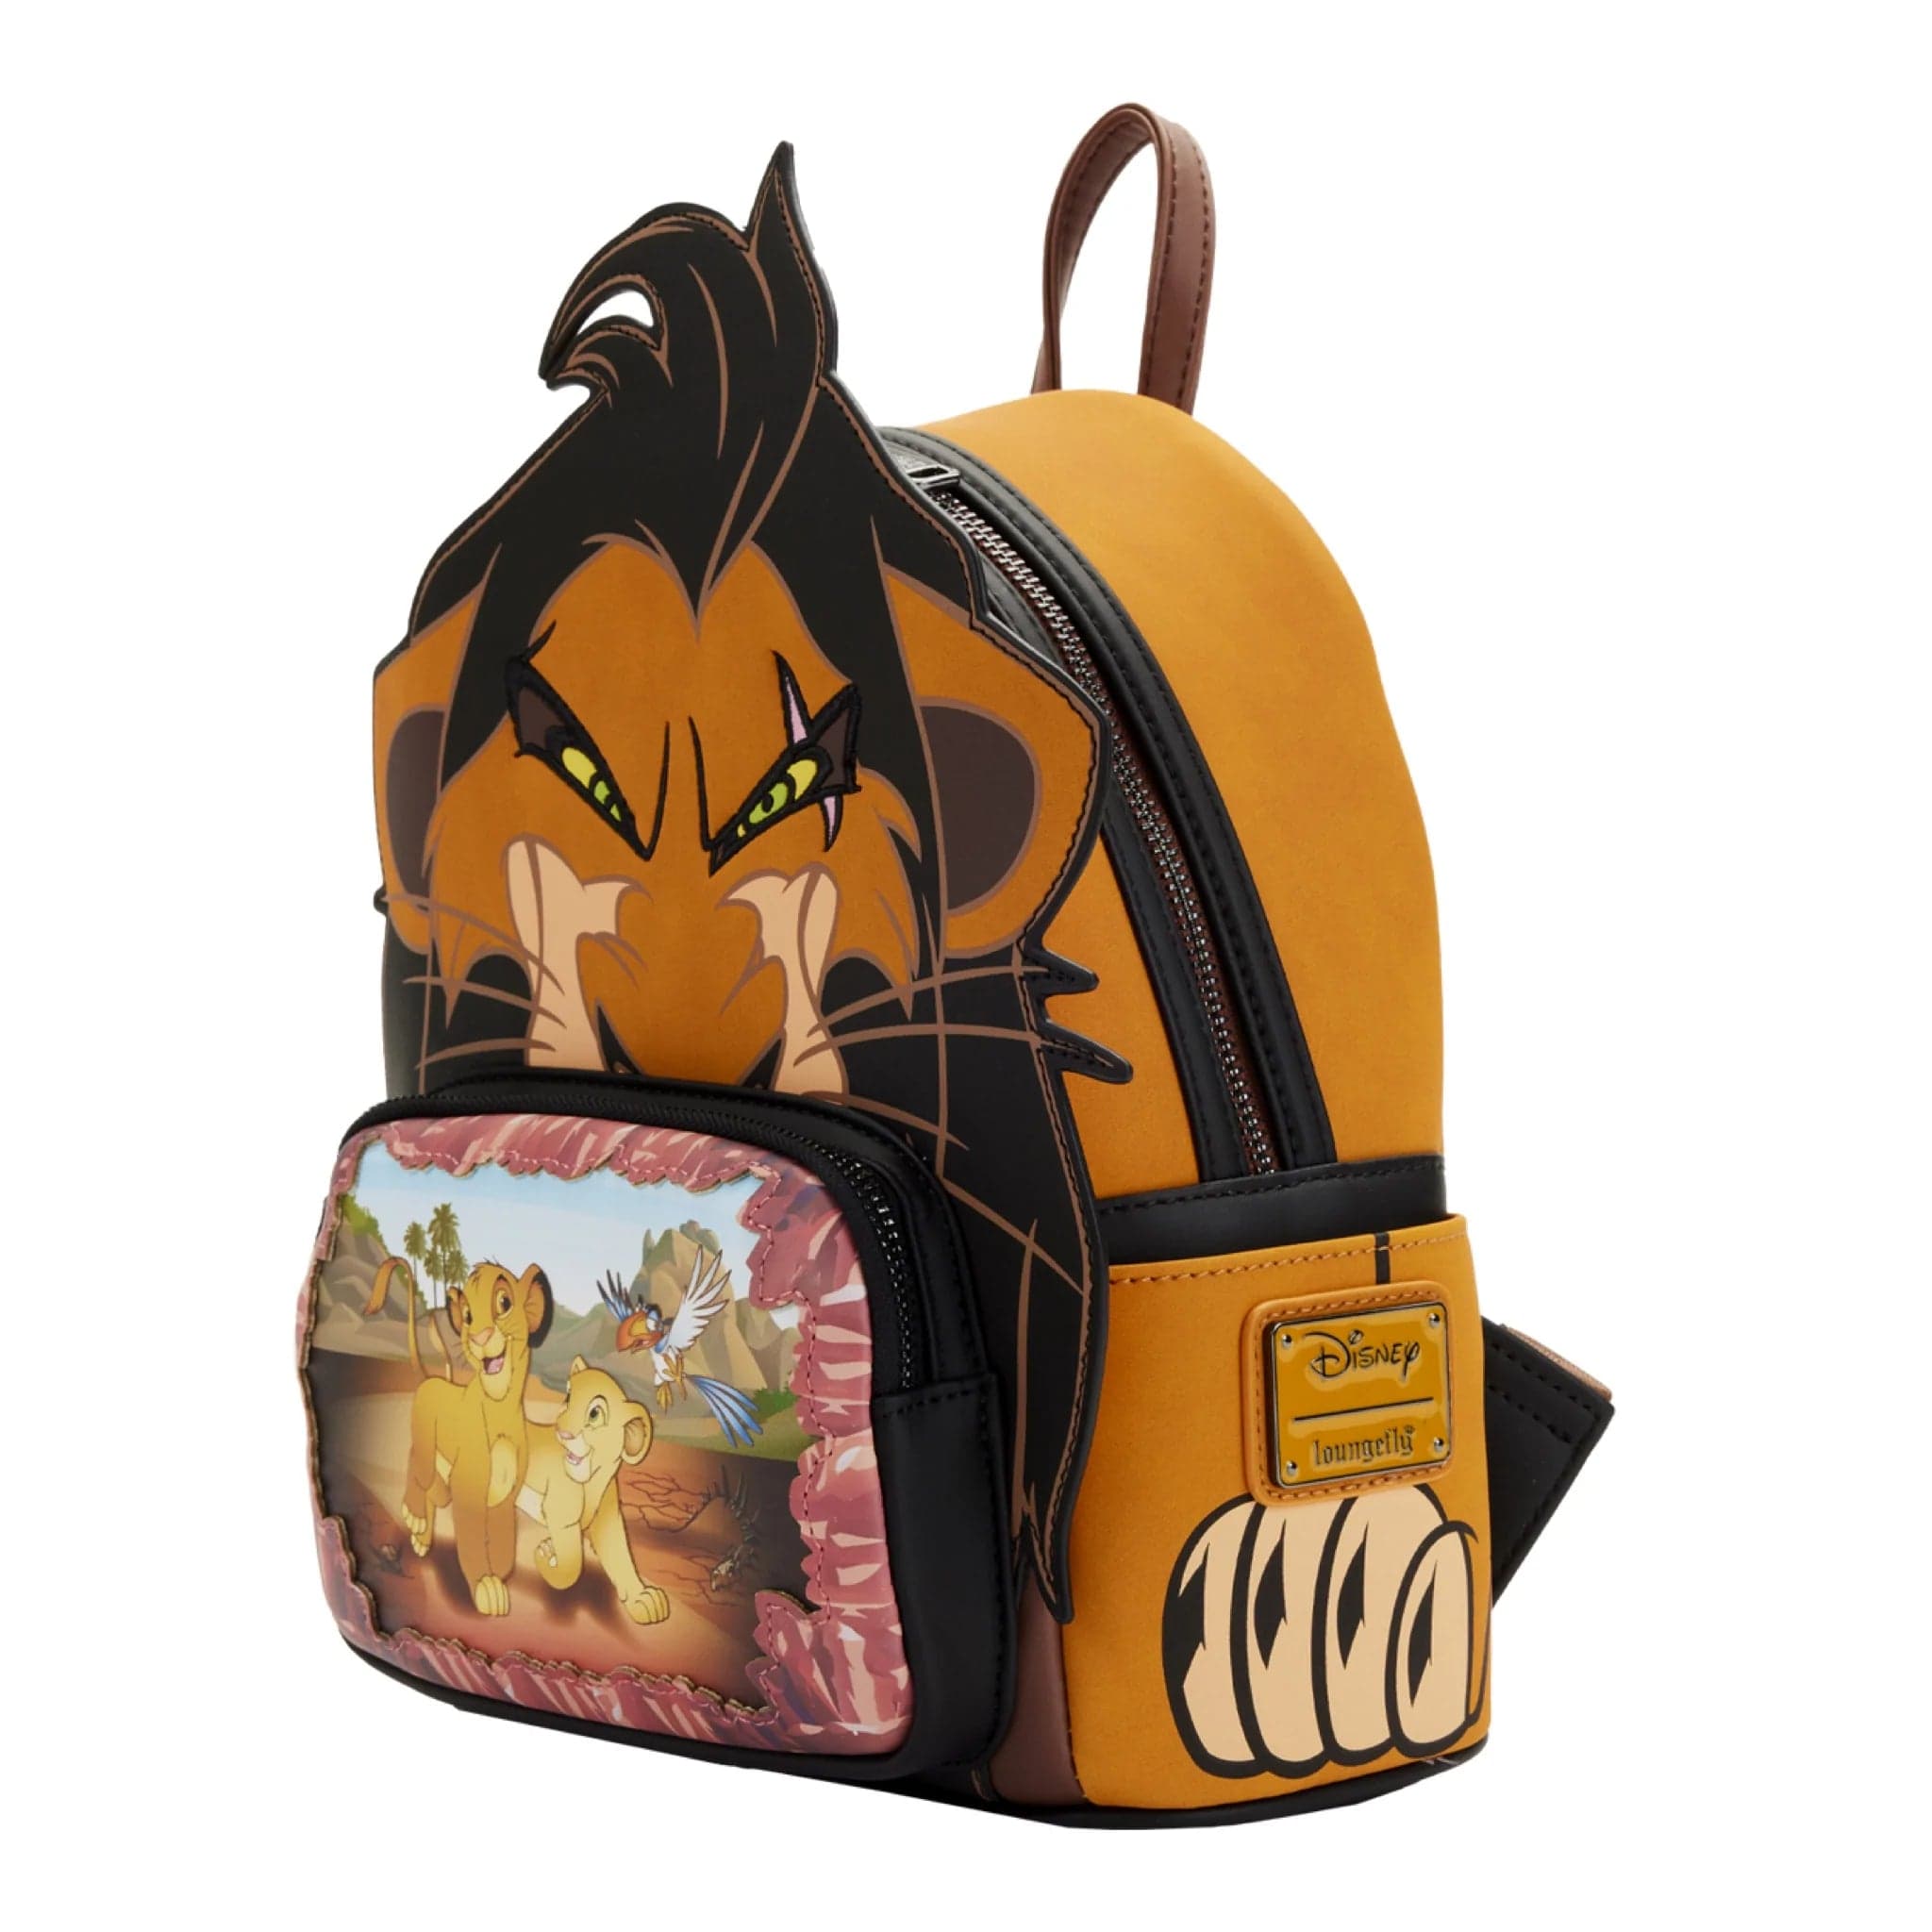 Loungefly, Bags, Rare Loungefly Disney Parks Villains Mini Backpack